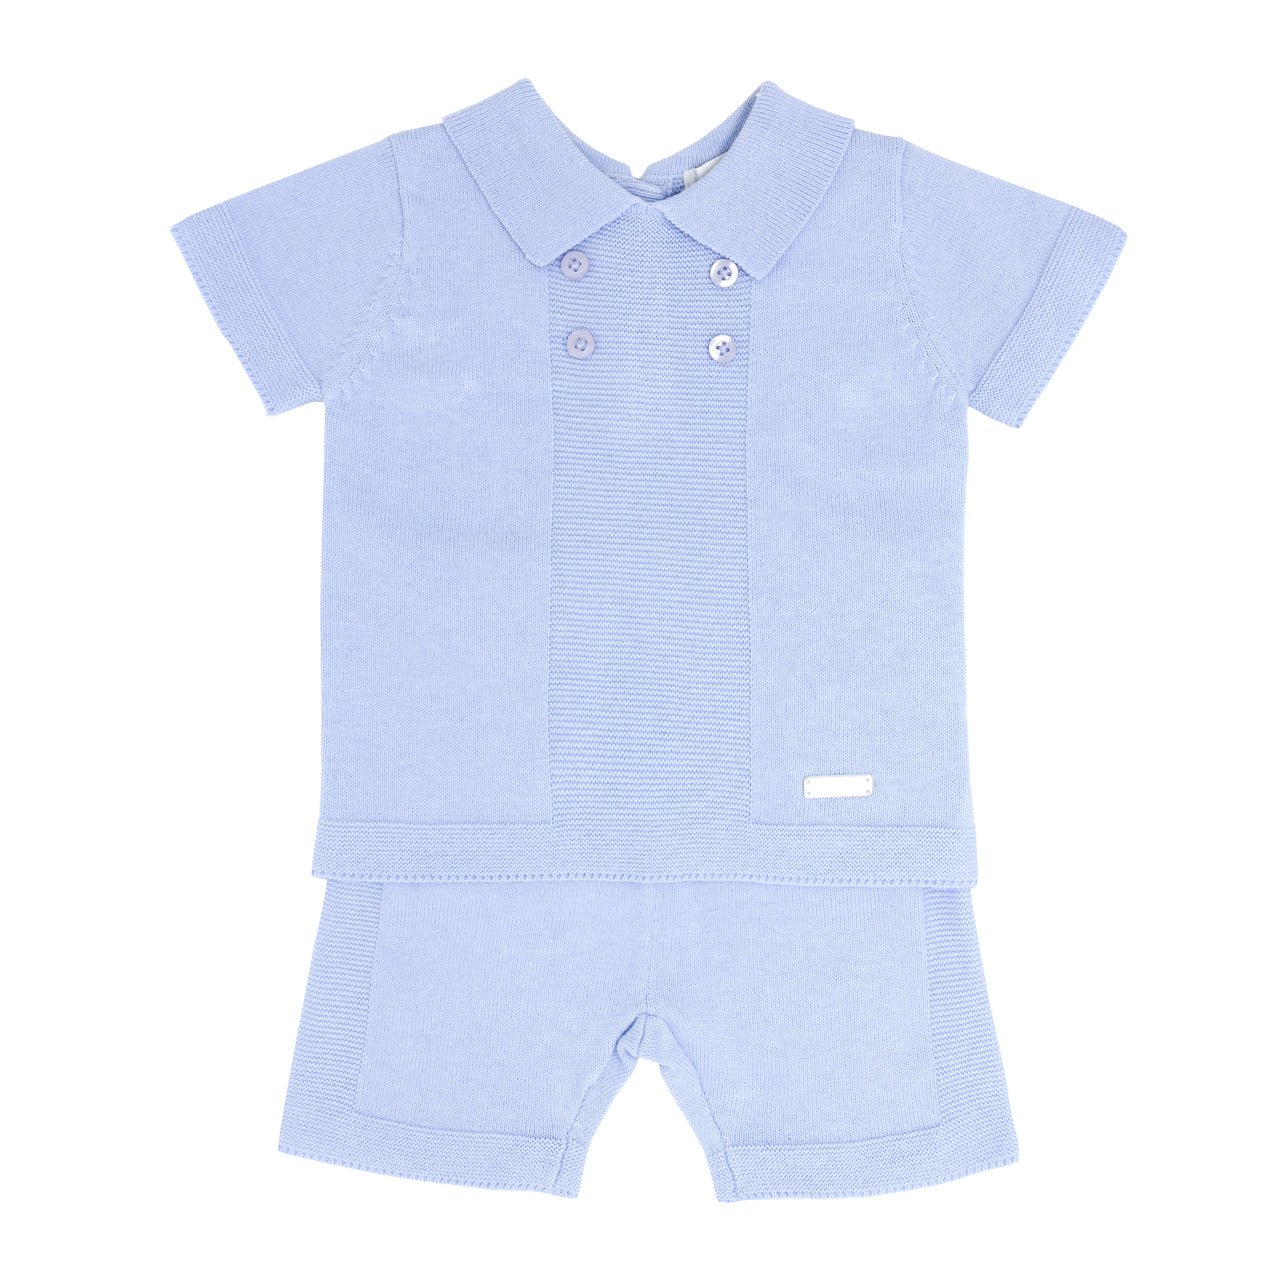 blues baby, 2 piece set, blues baby -  2 piece knitted top and short set, BB0276